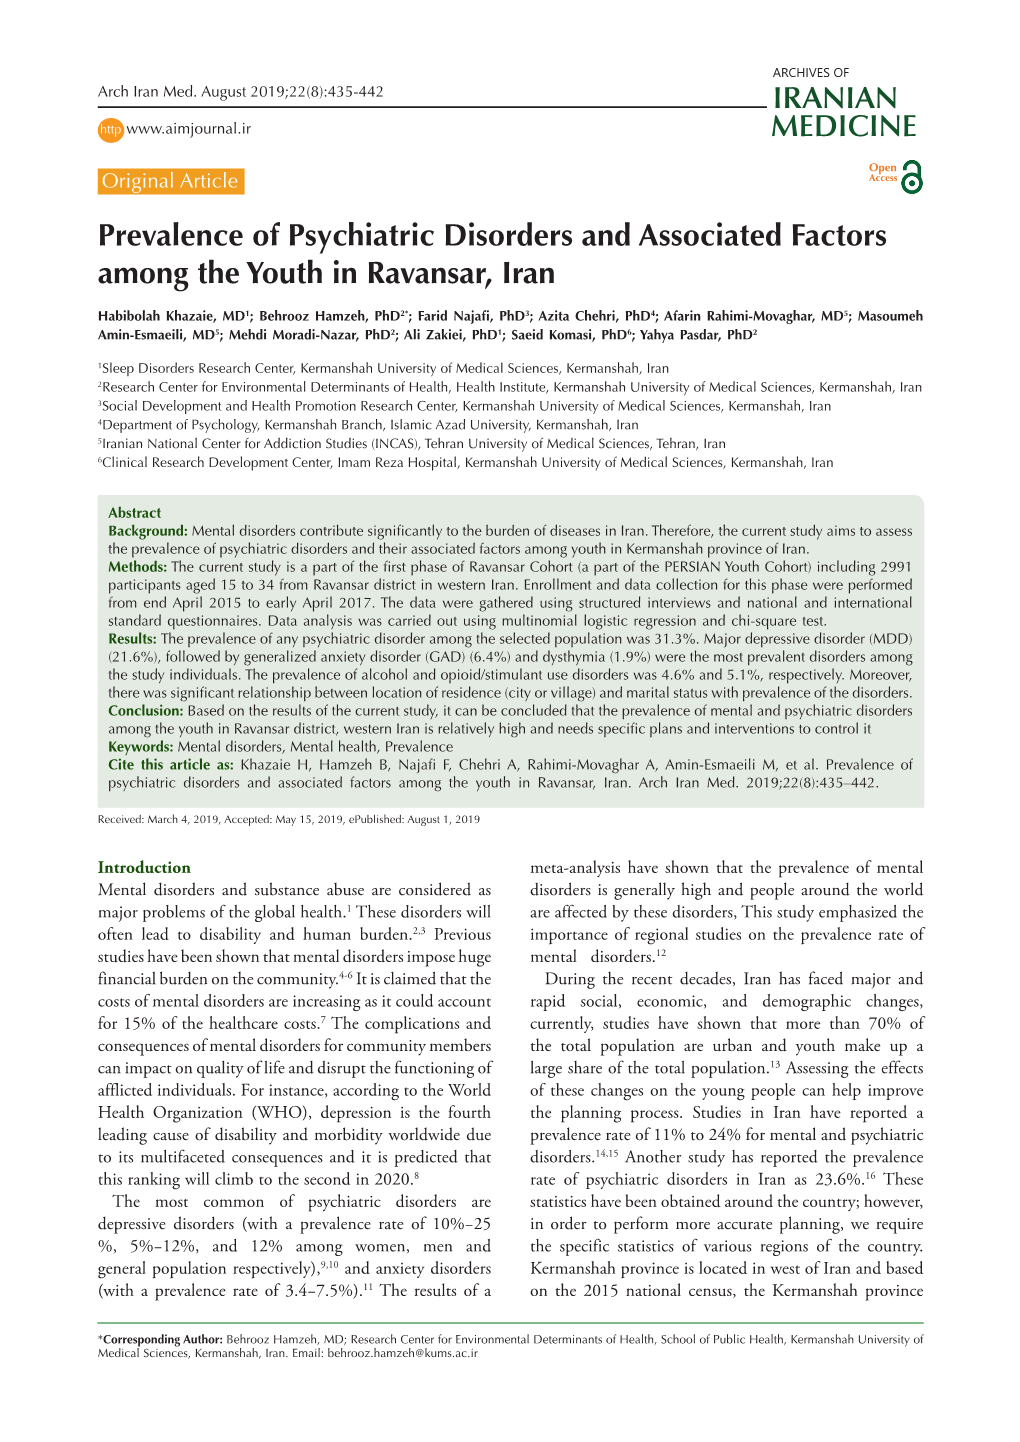 Prevalence of Psychiatric Disorders and Associated Factors Among the Youth in Ravansar, Iran